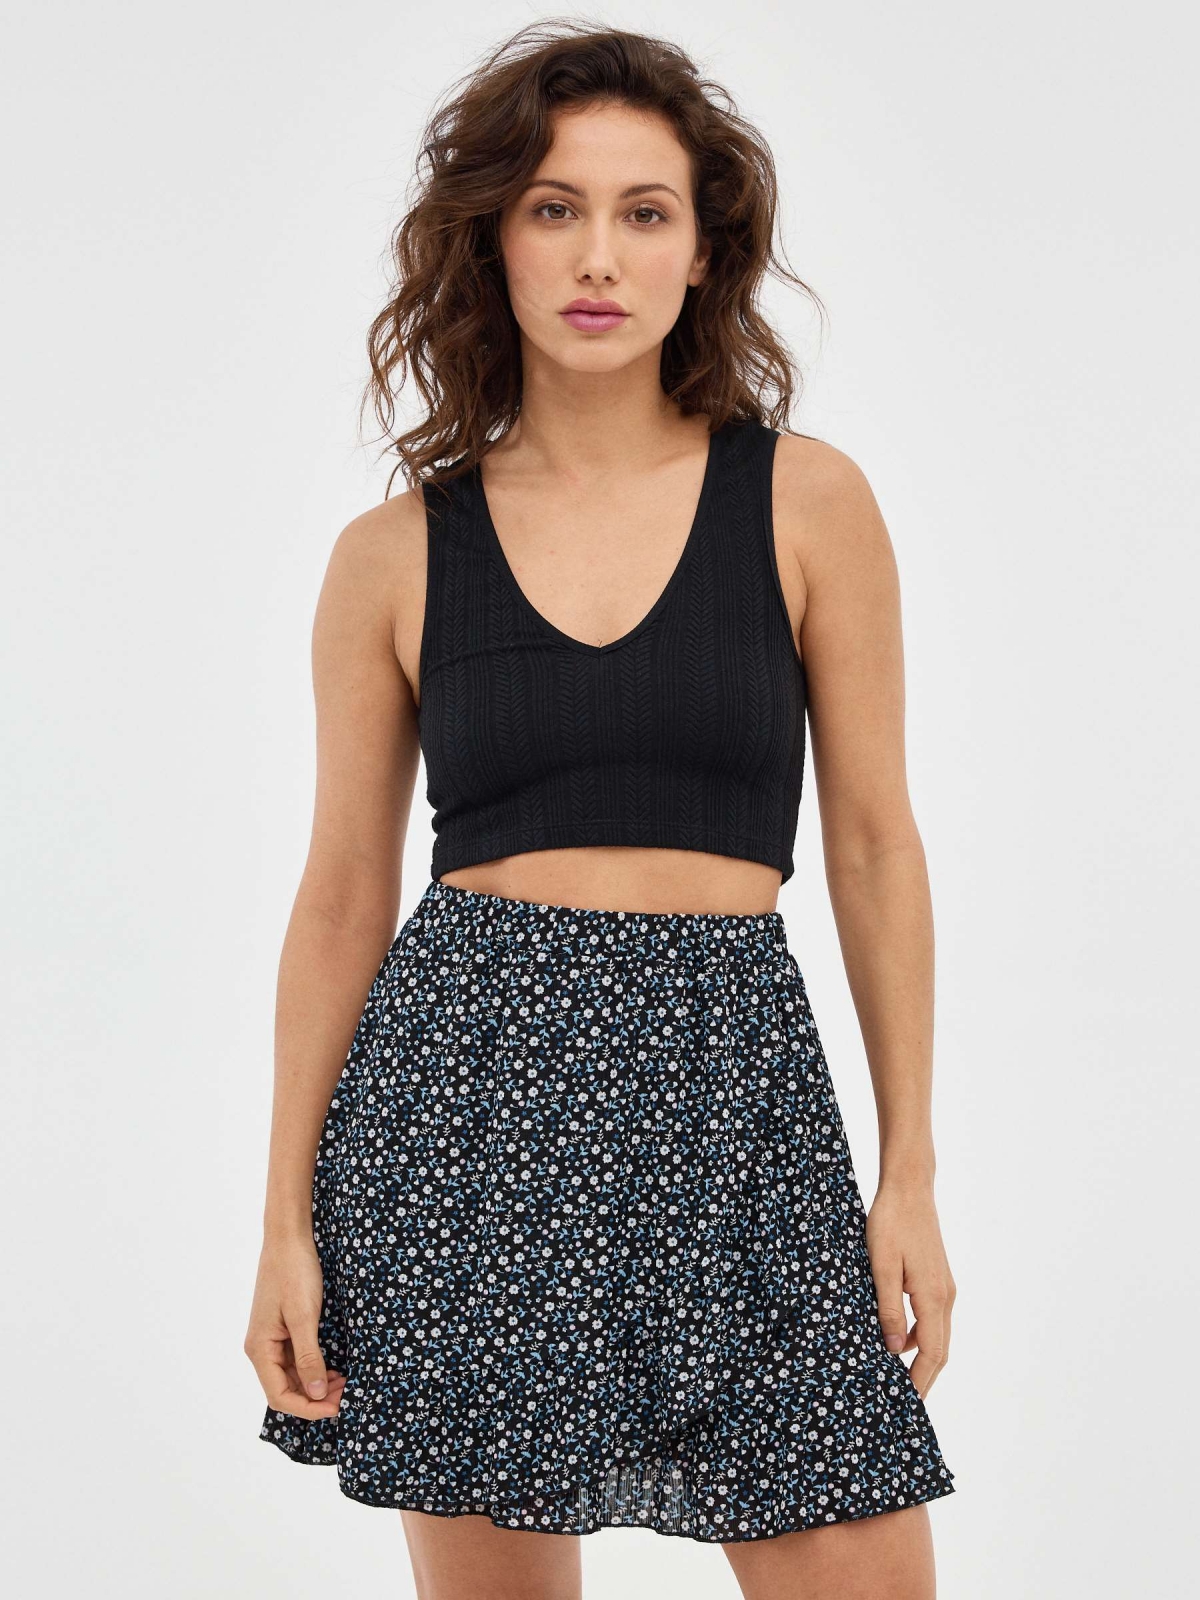 Ruffled wrap floral skirt black middle front view